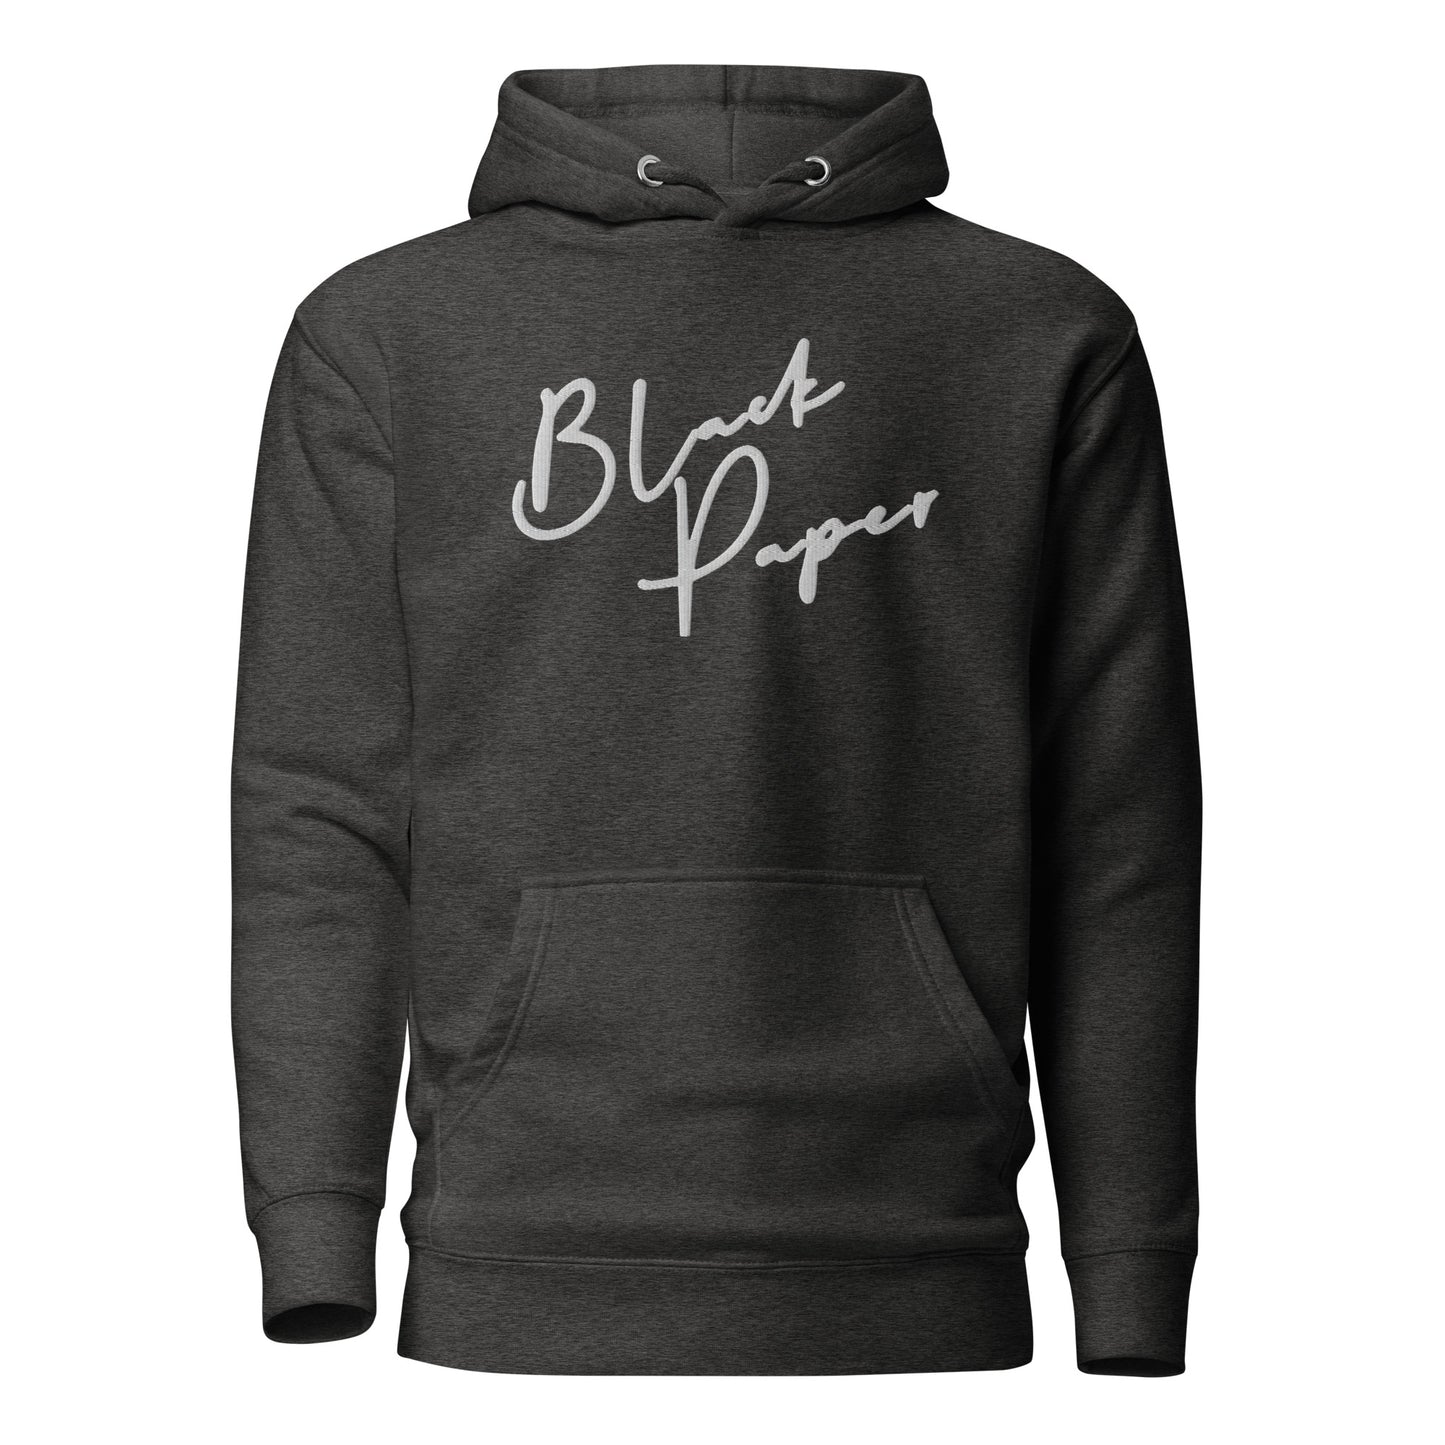 Hoodie - Signed by (front embroidery)